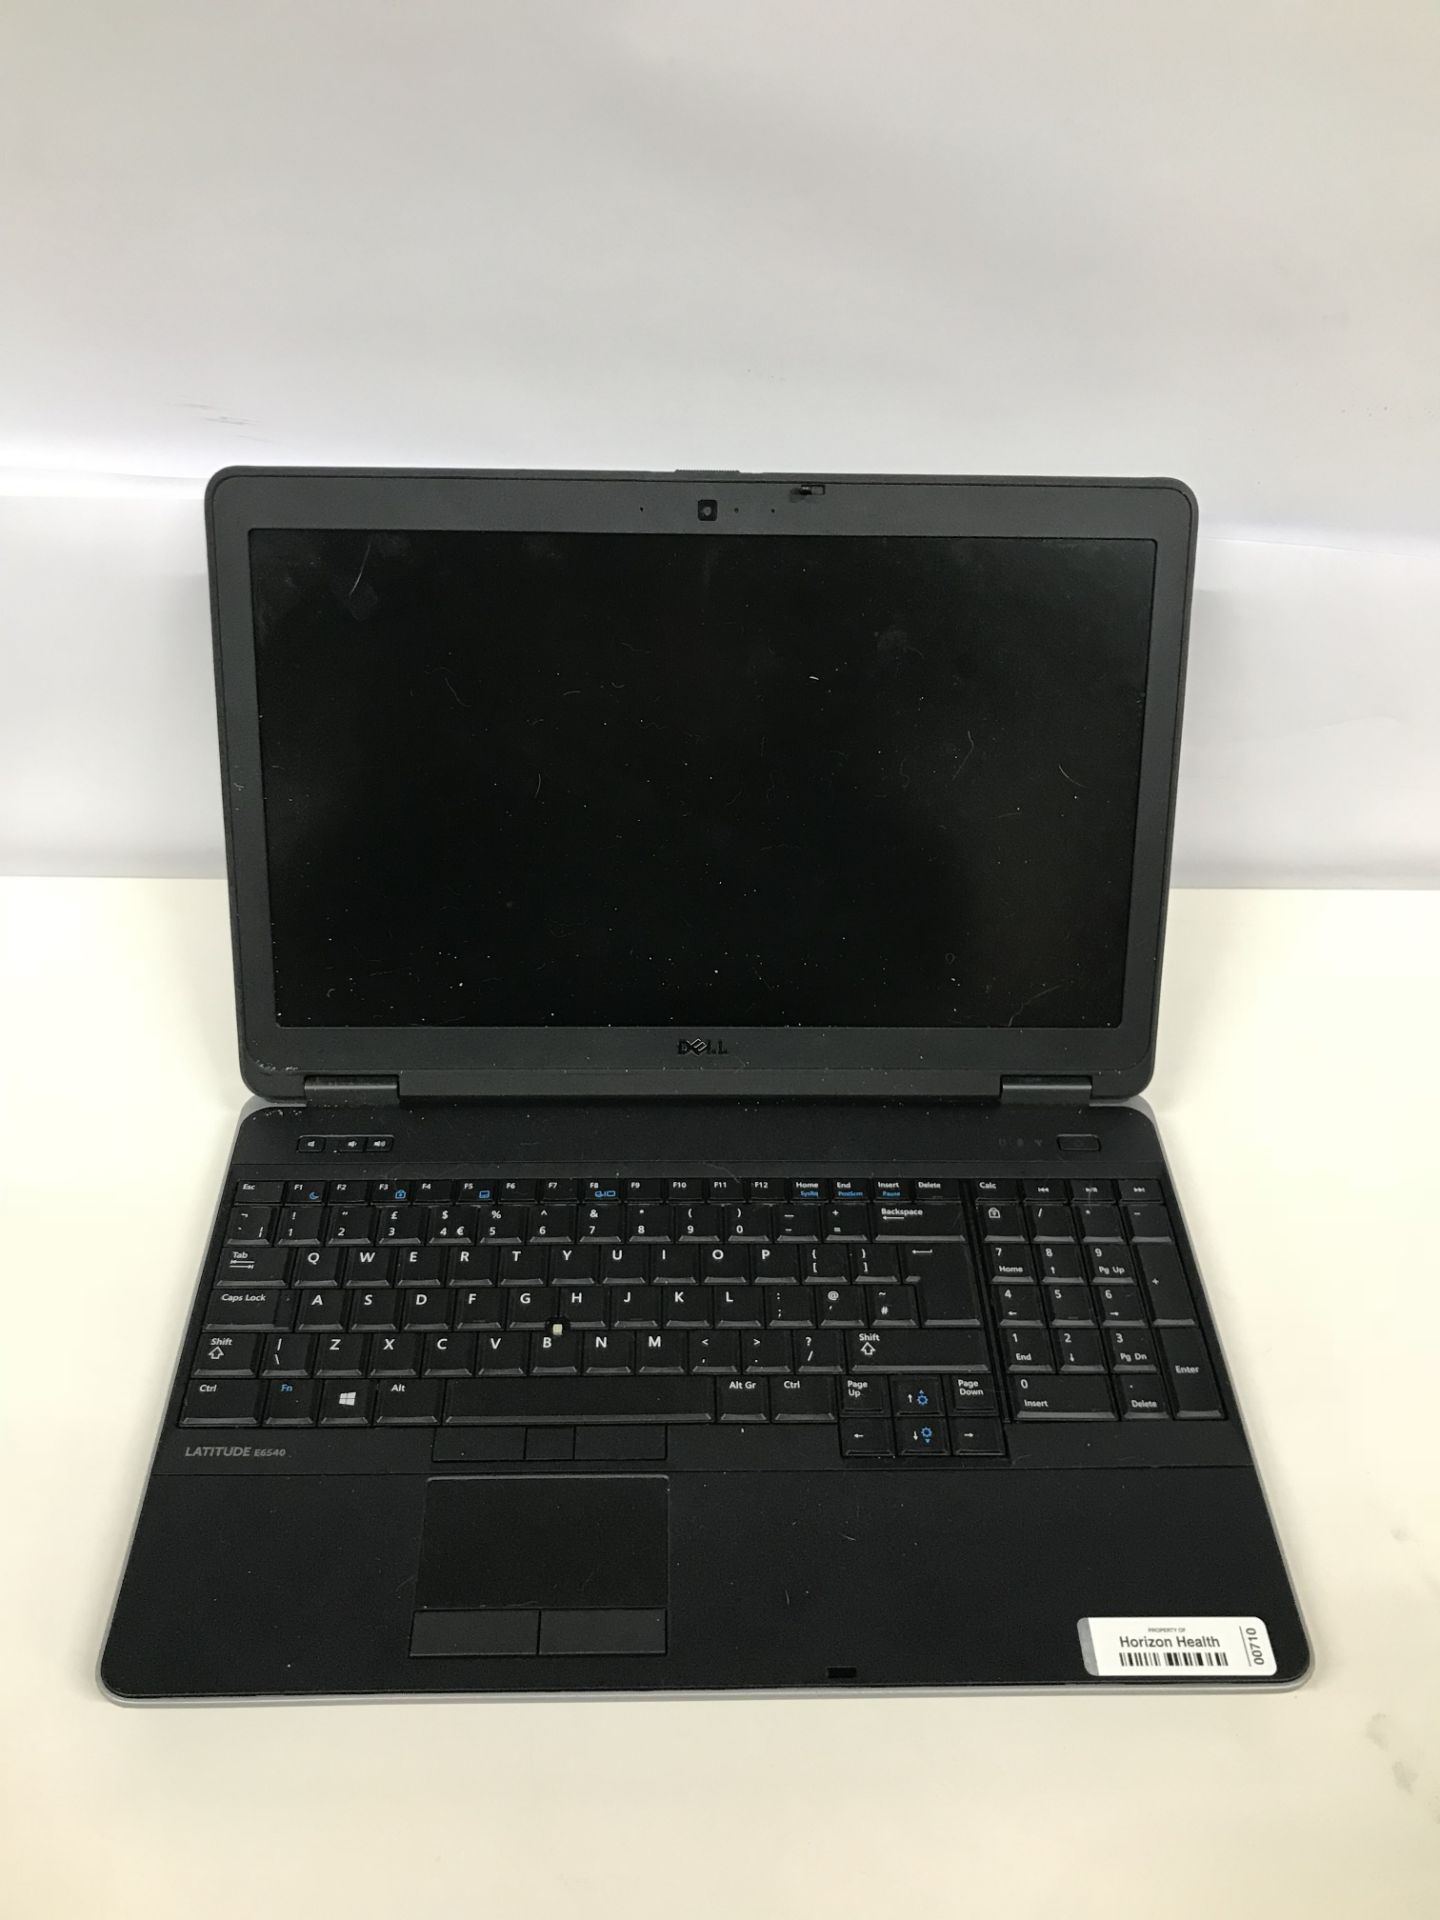 Dell Latitude E6540 Laptop (No charger) - Image 2 of 2